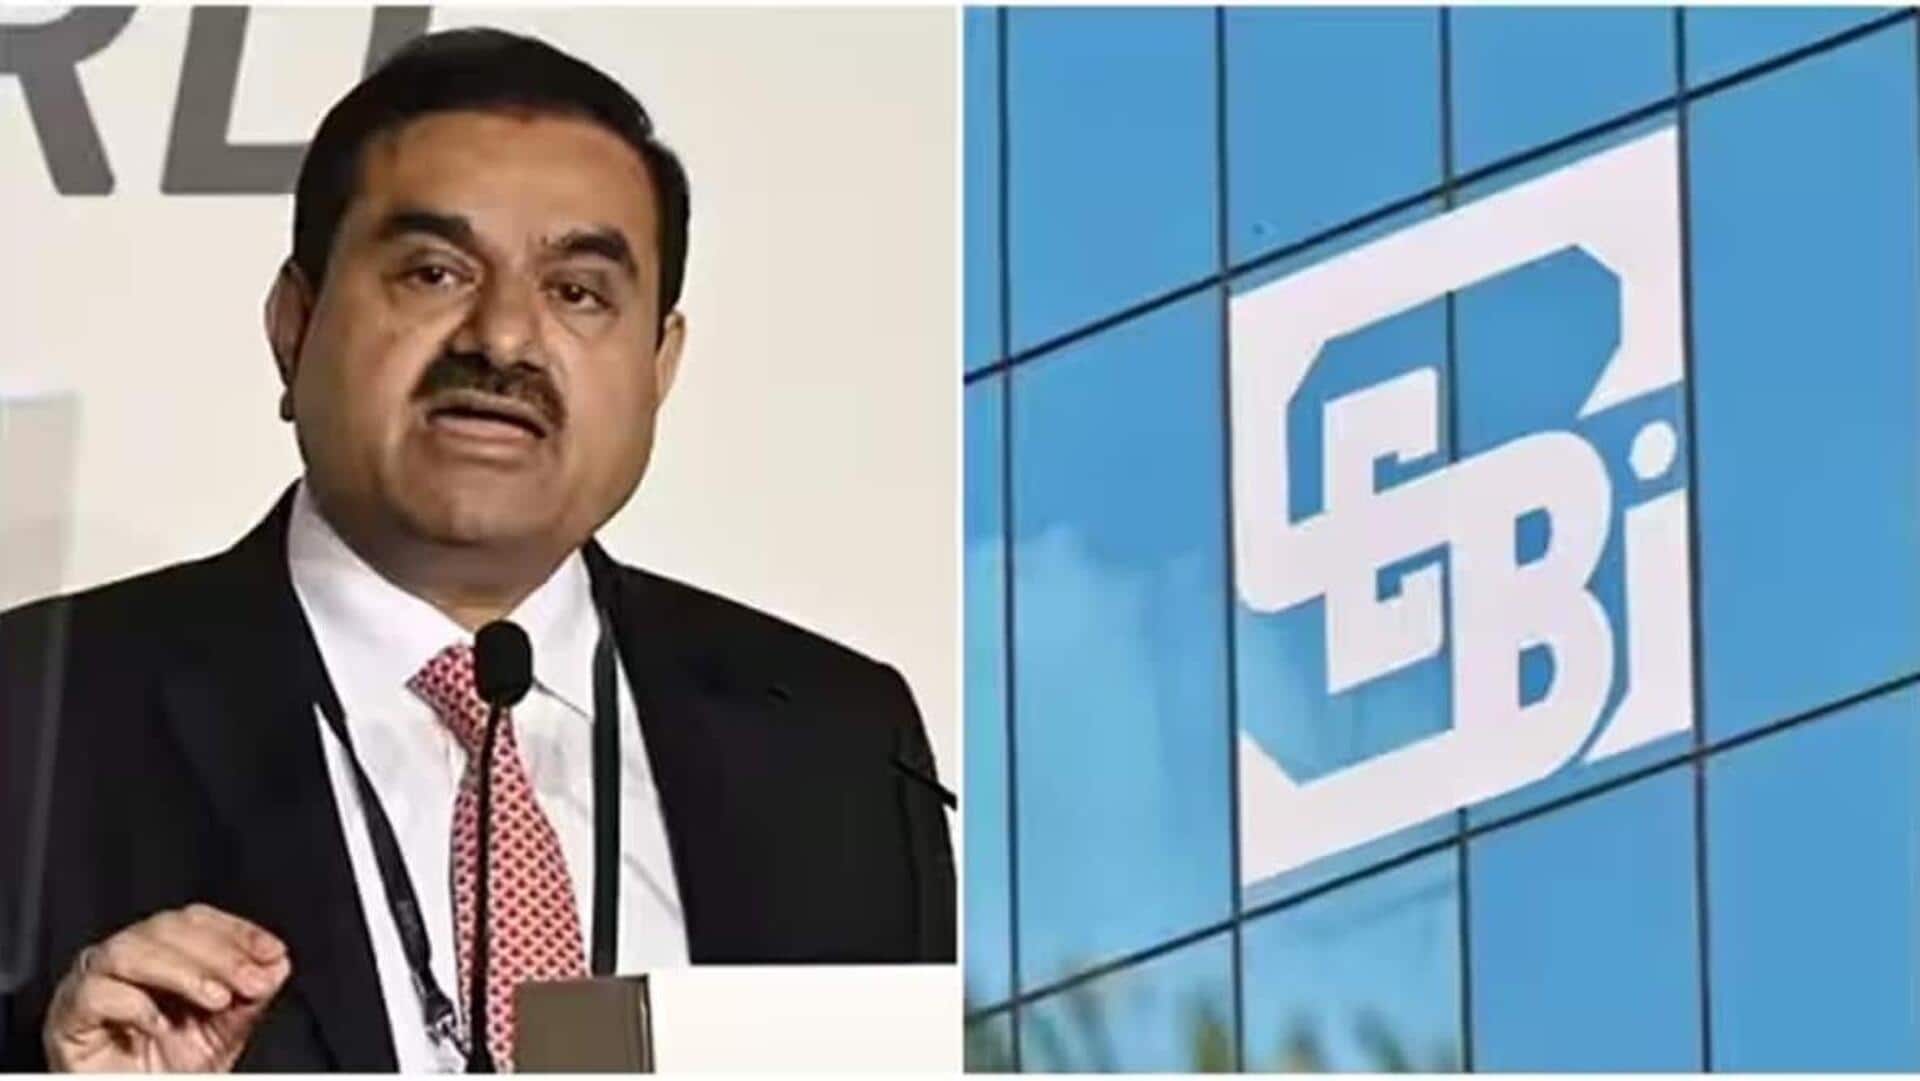 SEBI is investigating Adani Group's ties with Gulf Asia fund